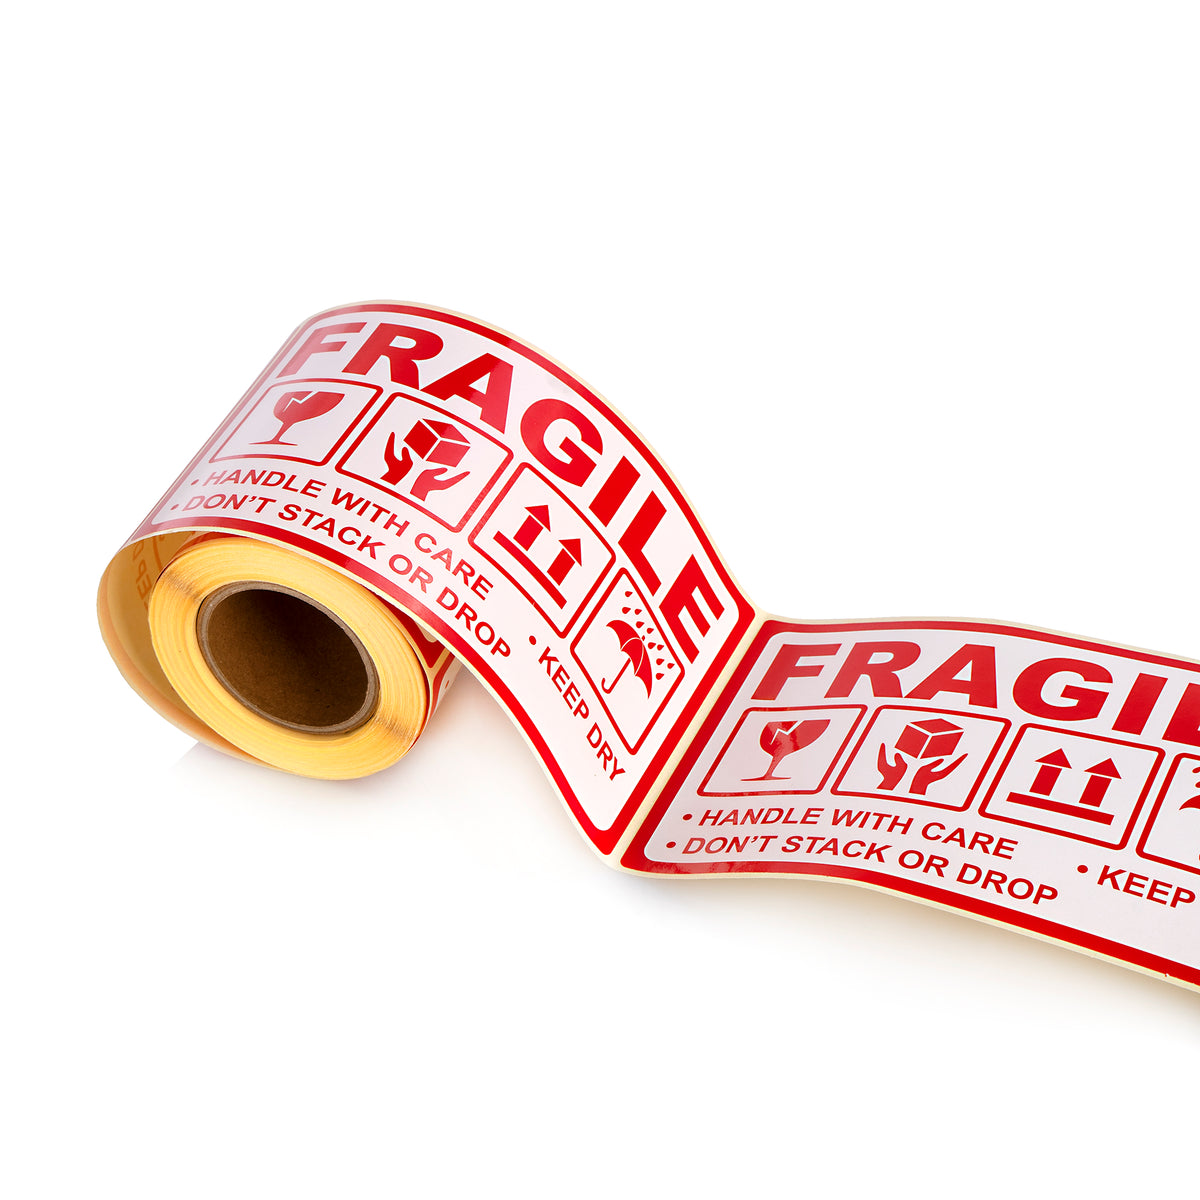 Warning Labels on Roll 90x150 mm FRAGILE- handle with care- keep dry- don’t stack or drop- this way up 100 pcs